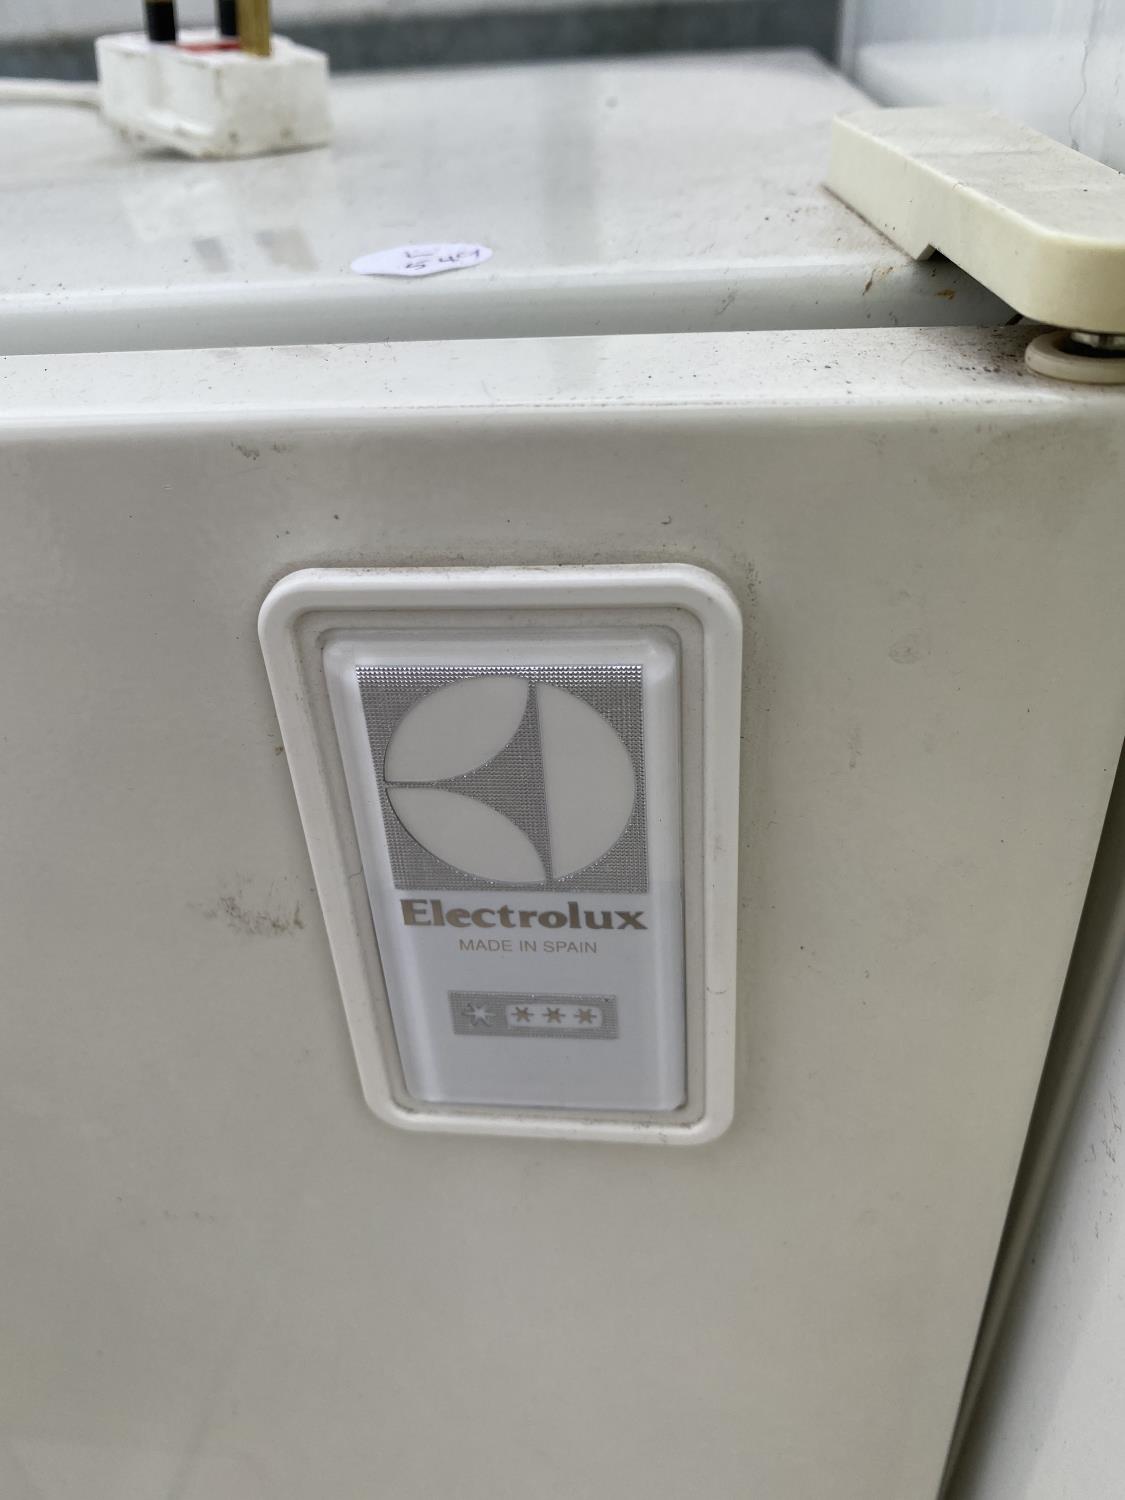 A WHITE ELECTROLUX COUNTER TOP FRIDGE BELIEVED IN WORKING ORDER BUT NO WARRANTY - Image 2 of 4